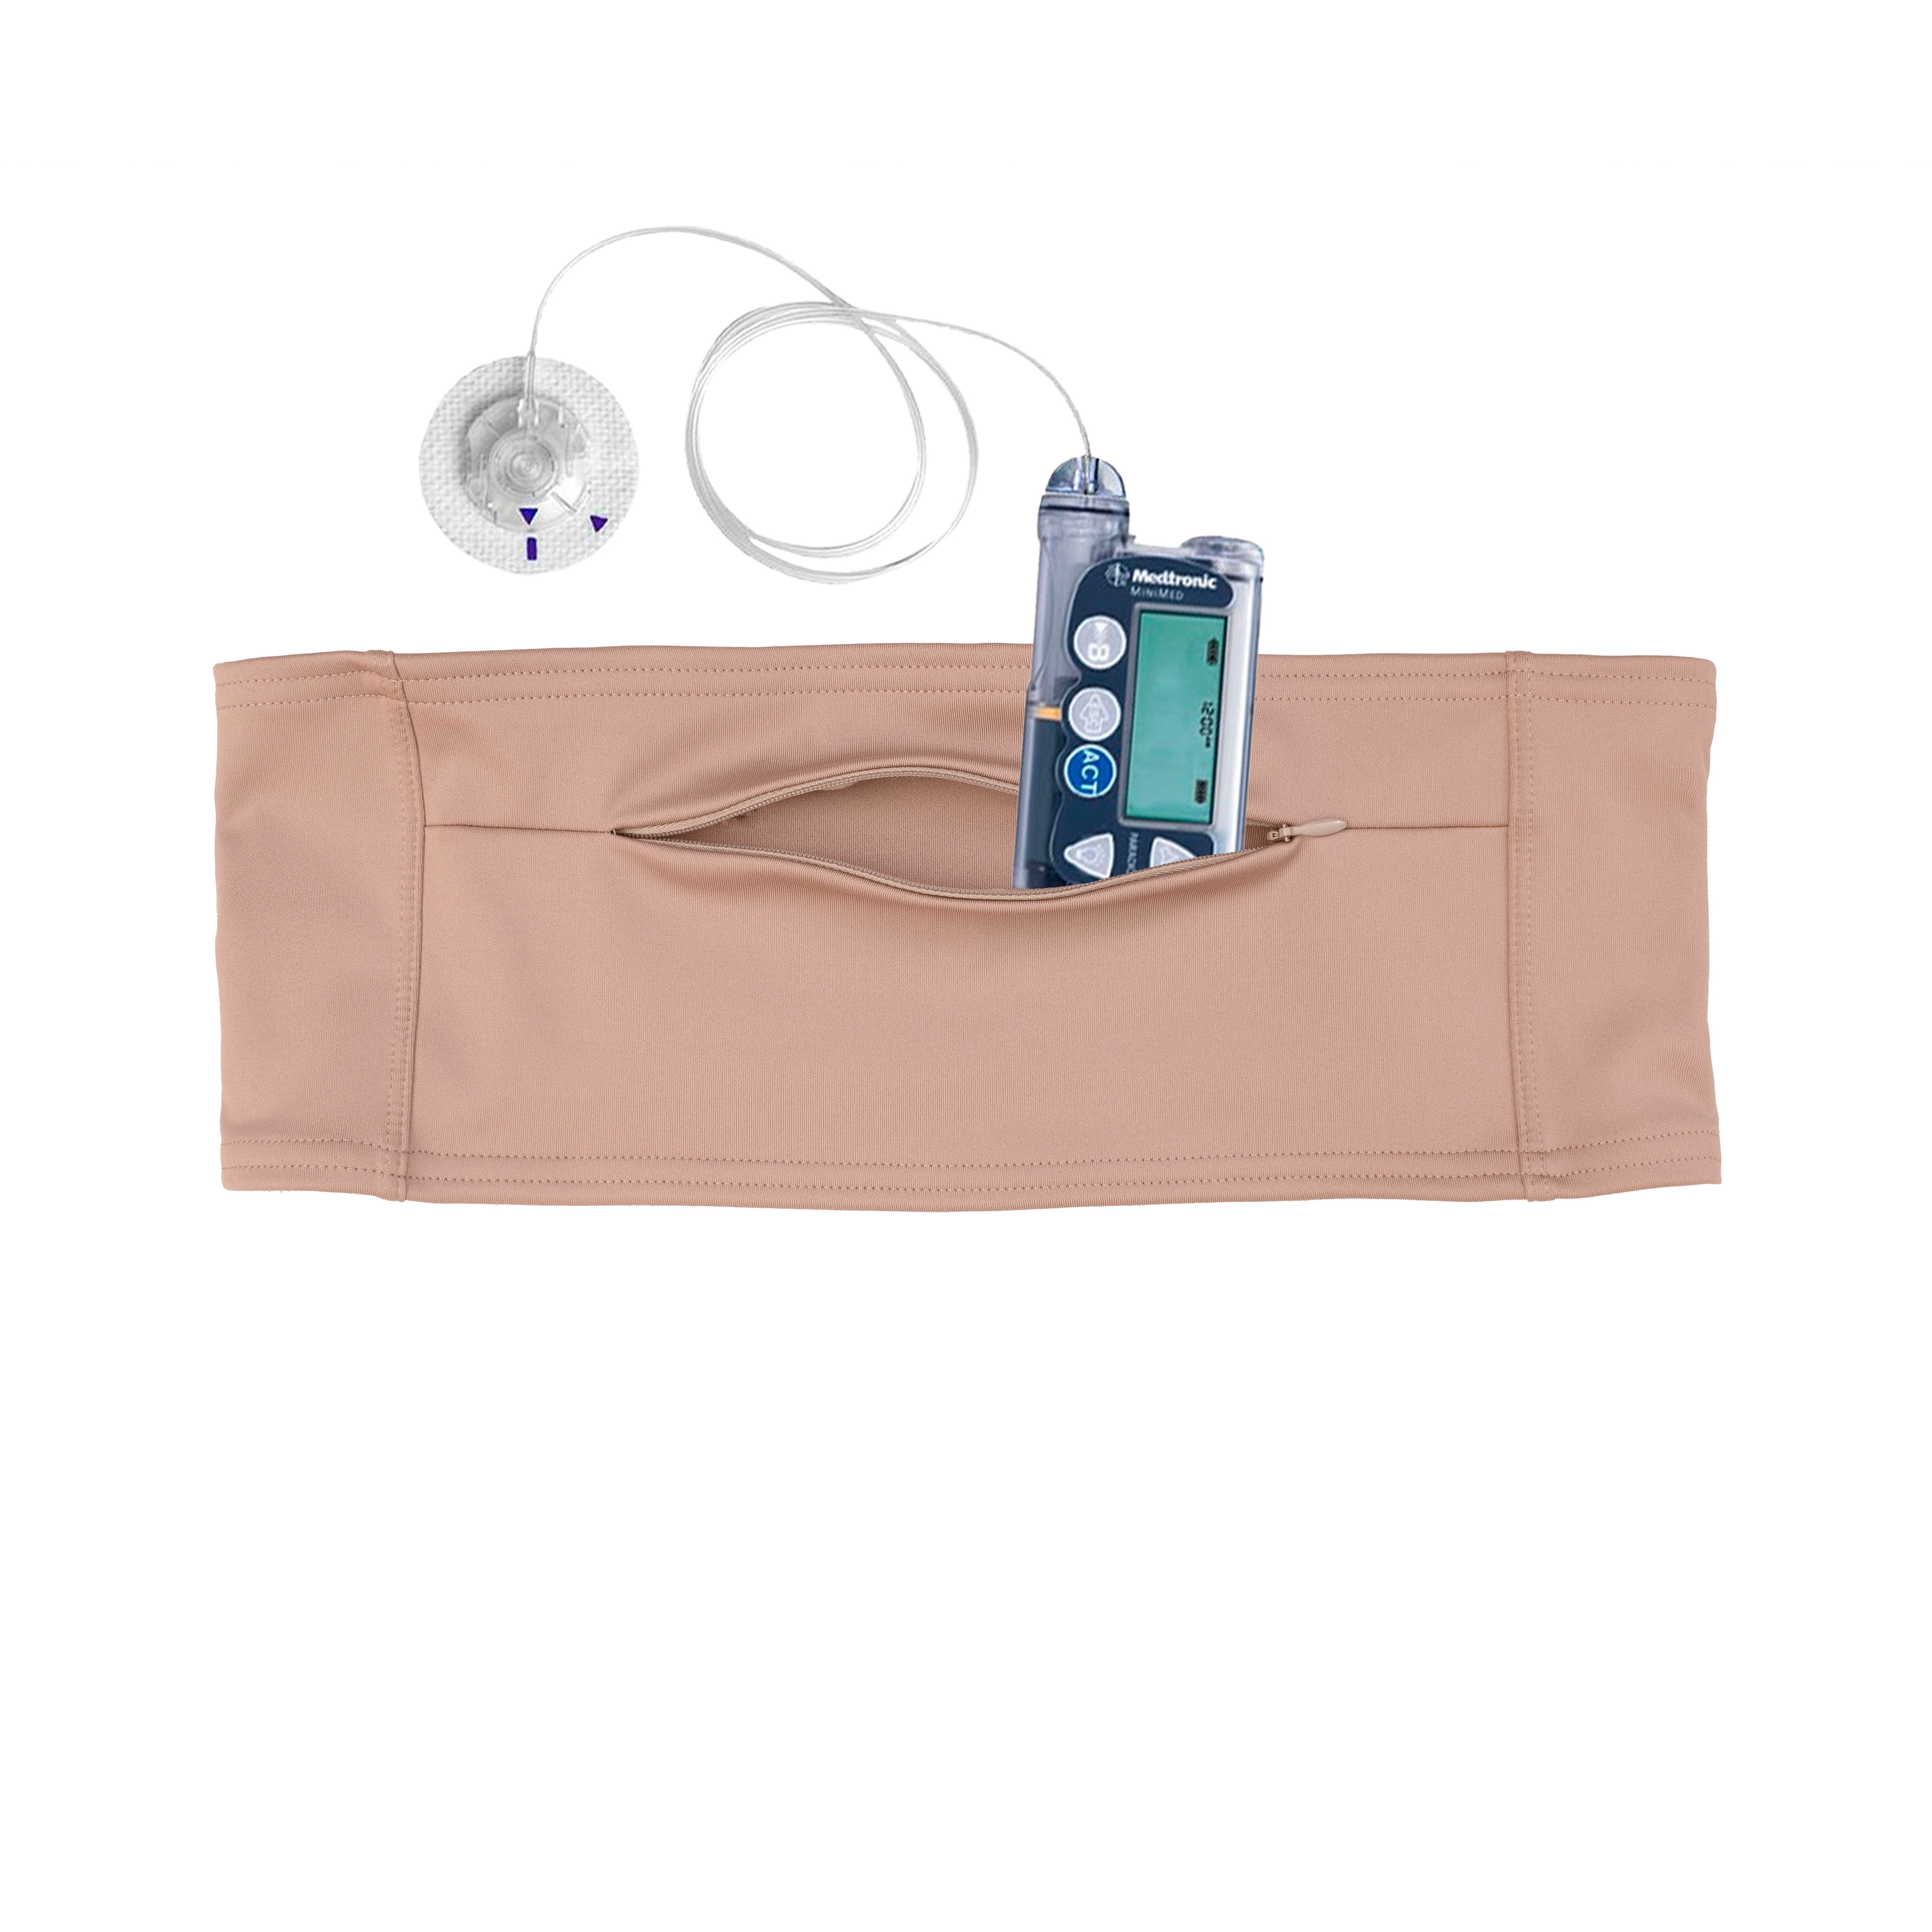 Tan Double Pocket Belt carries T1D Insulin Pump, Glucose Monitor, Smartphone, Accessories, Epipen, Medical Devices